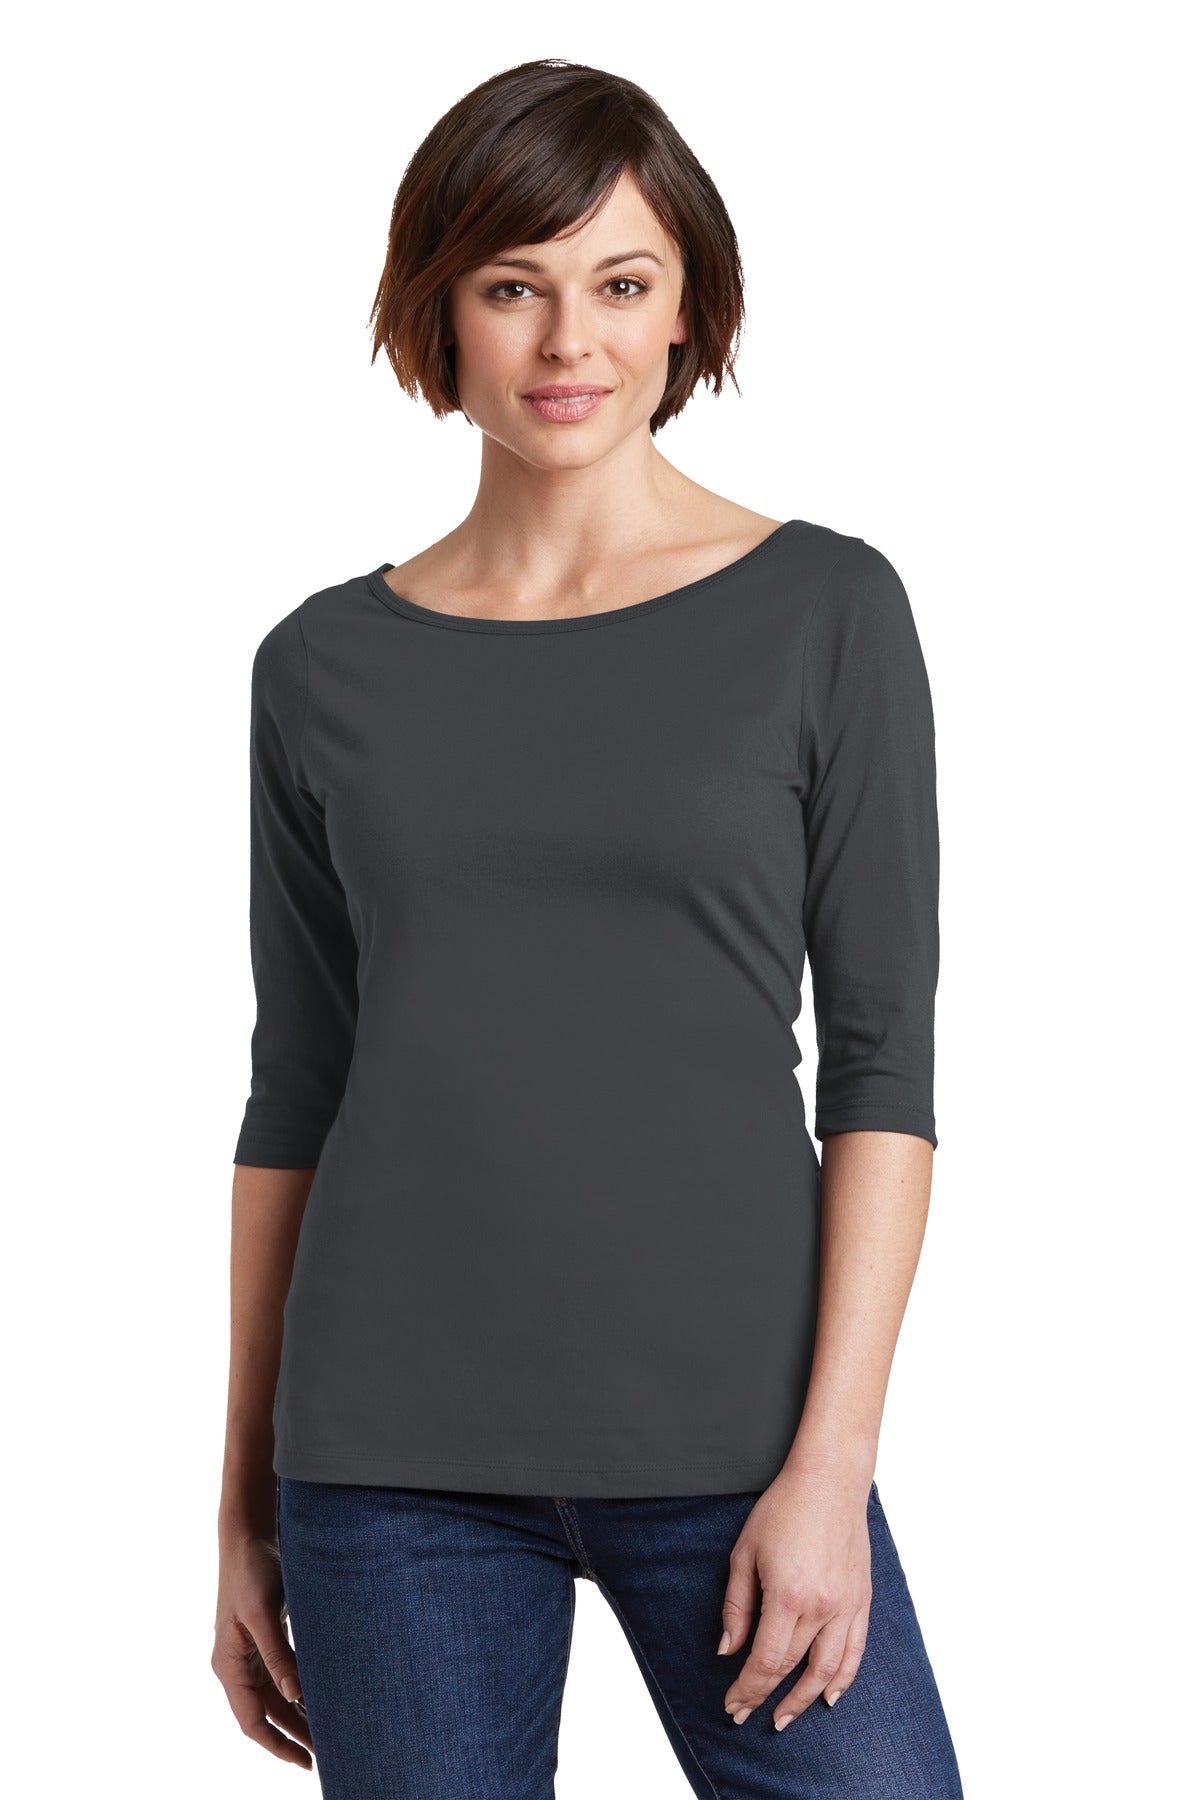 District® Women's Perfect Weight® 3/4-Sleeve Tee. DM107L - DFW Impression